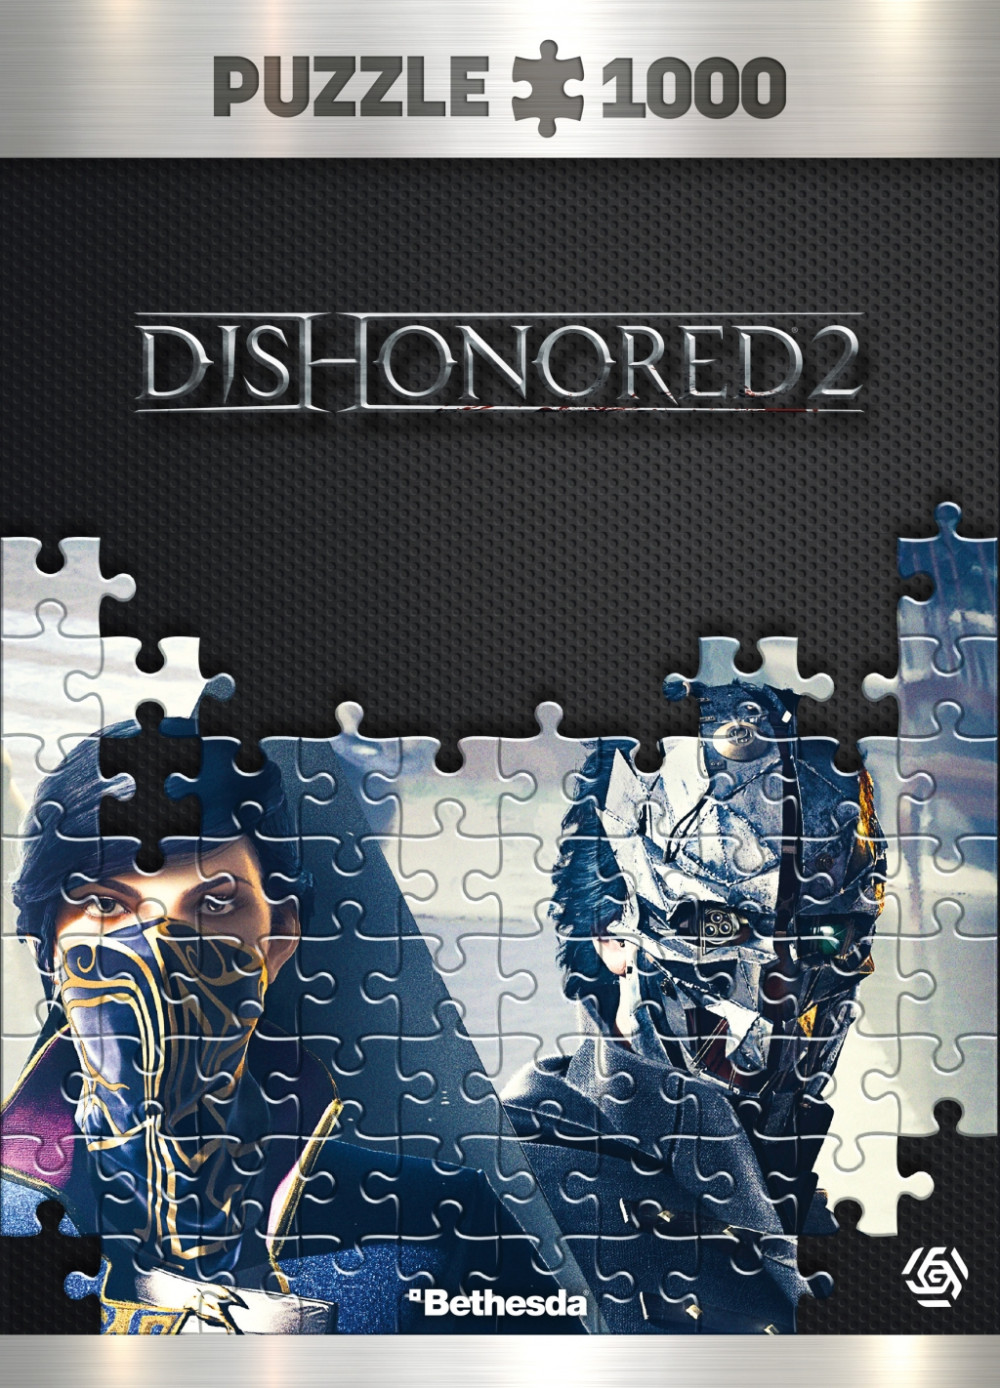 Пазл Dishonored 2: Throne (1000 элементов)